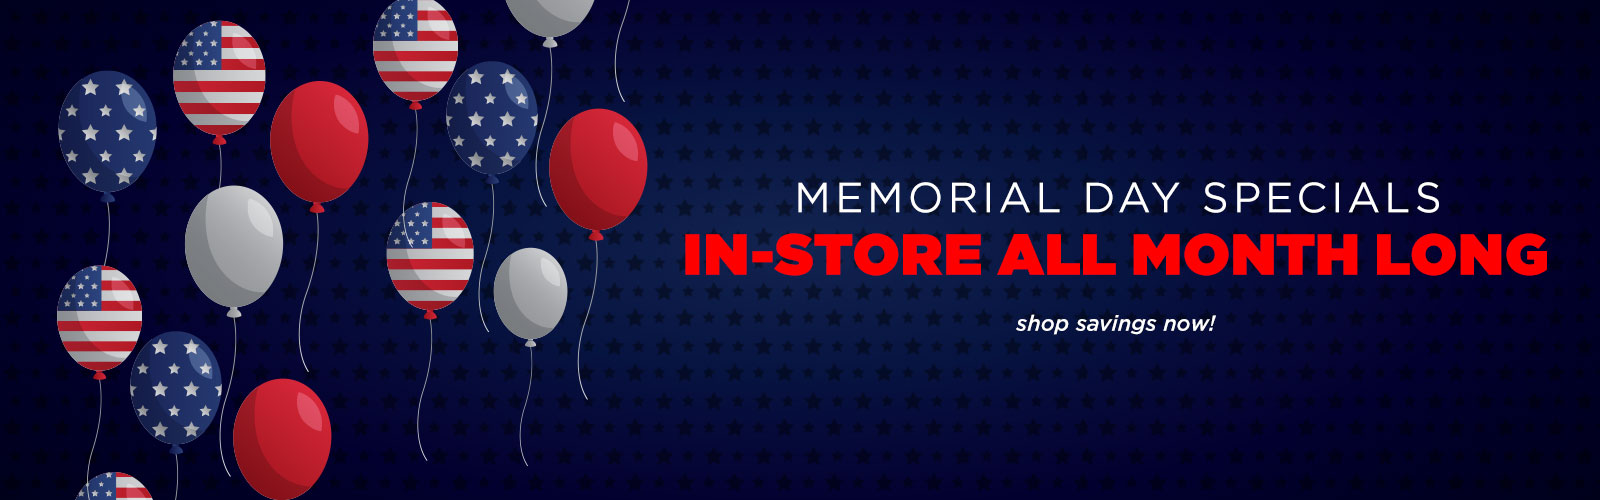 Memorial Day Specials In-store All Month Long - Shop Now